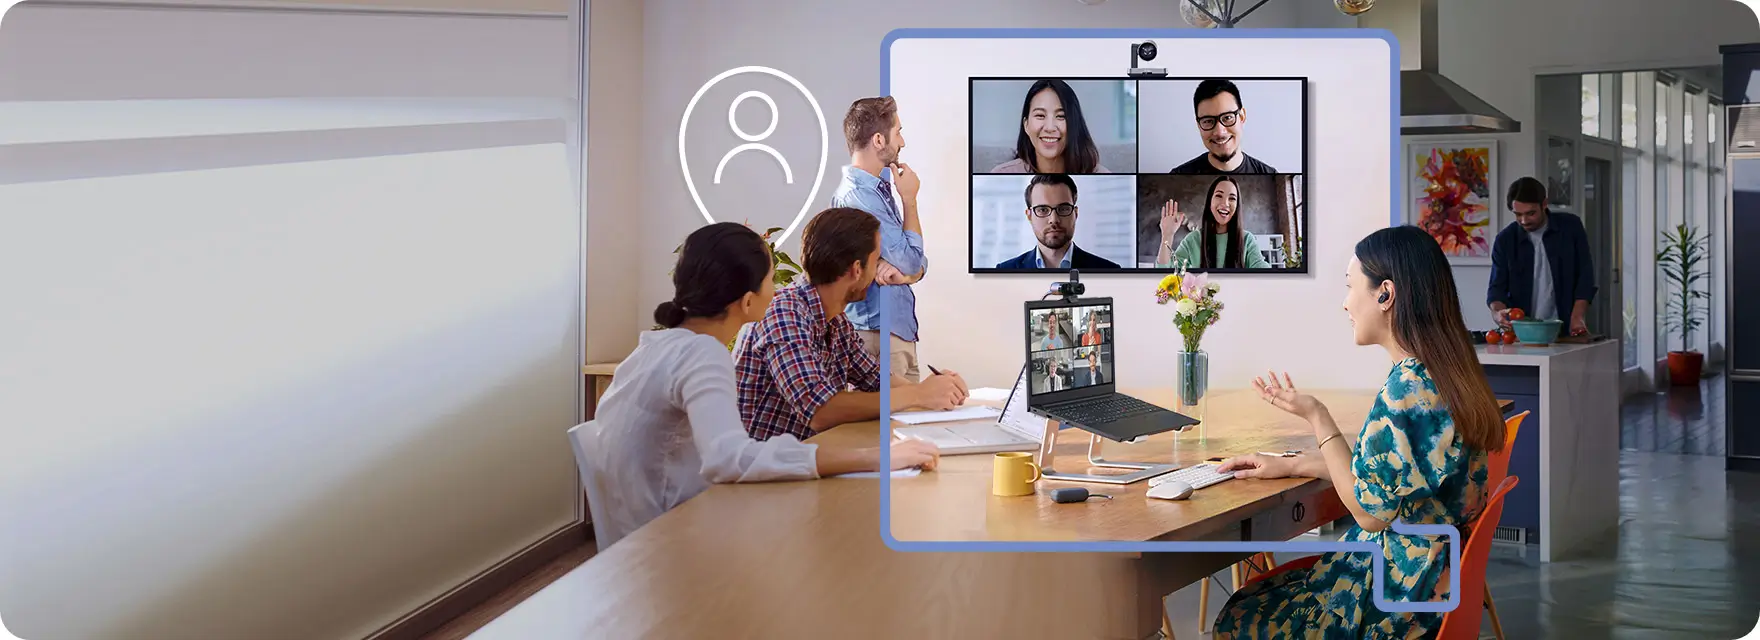 Concept image of business people talking to other team members in video chat